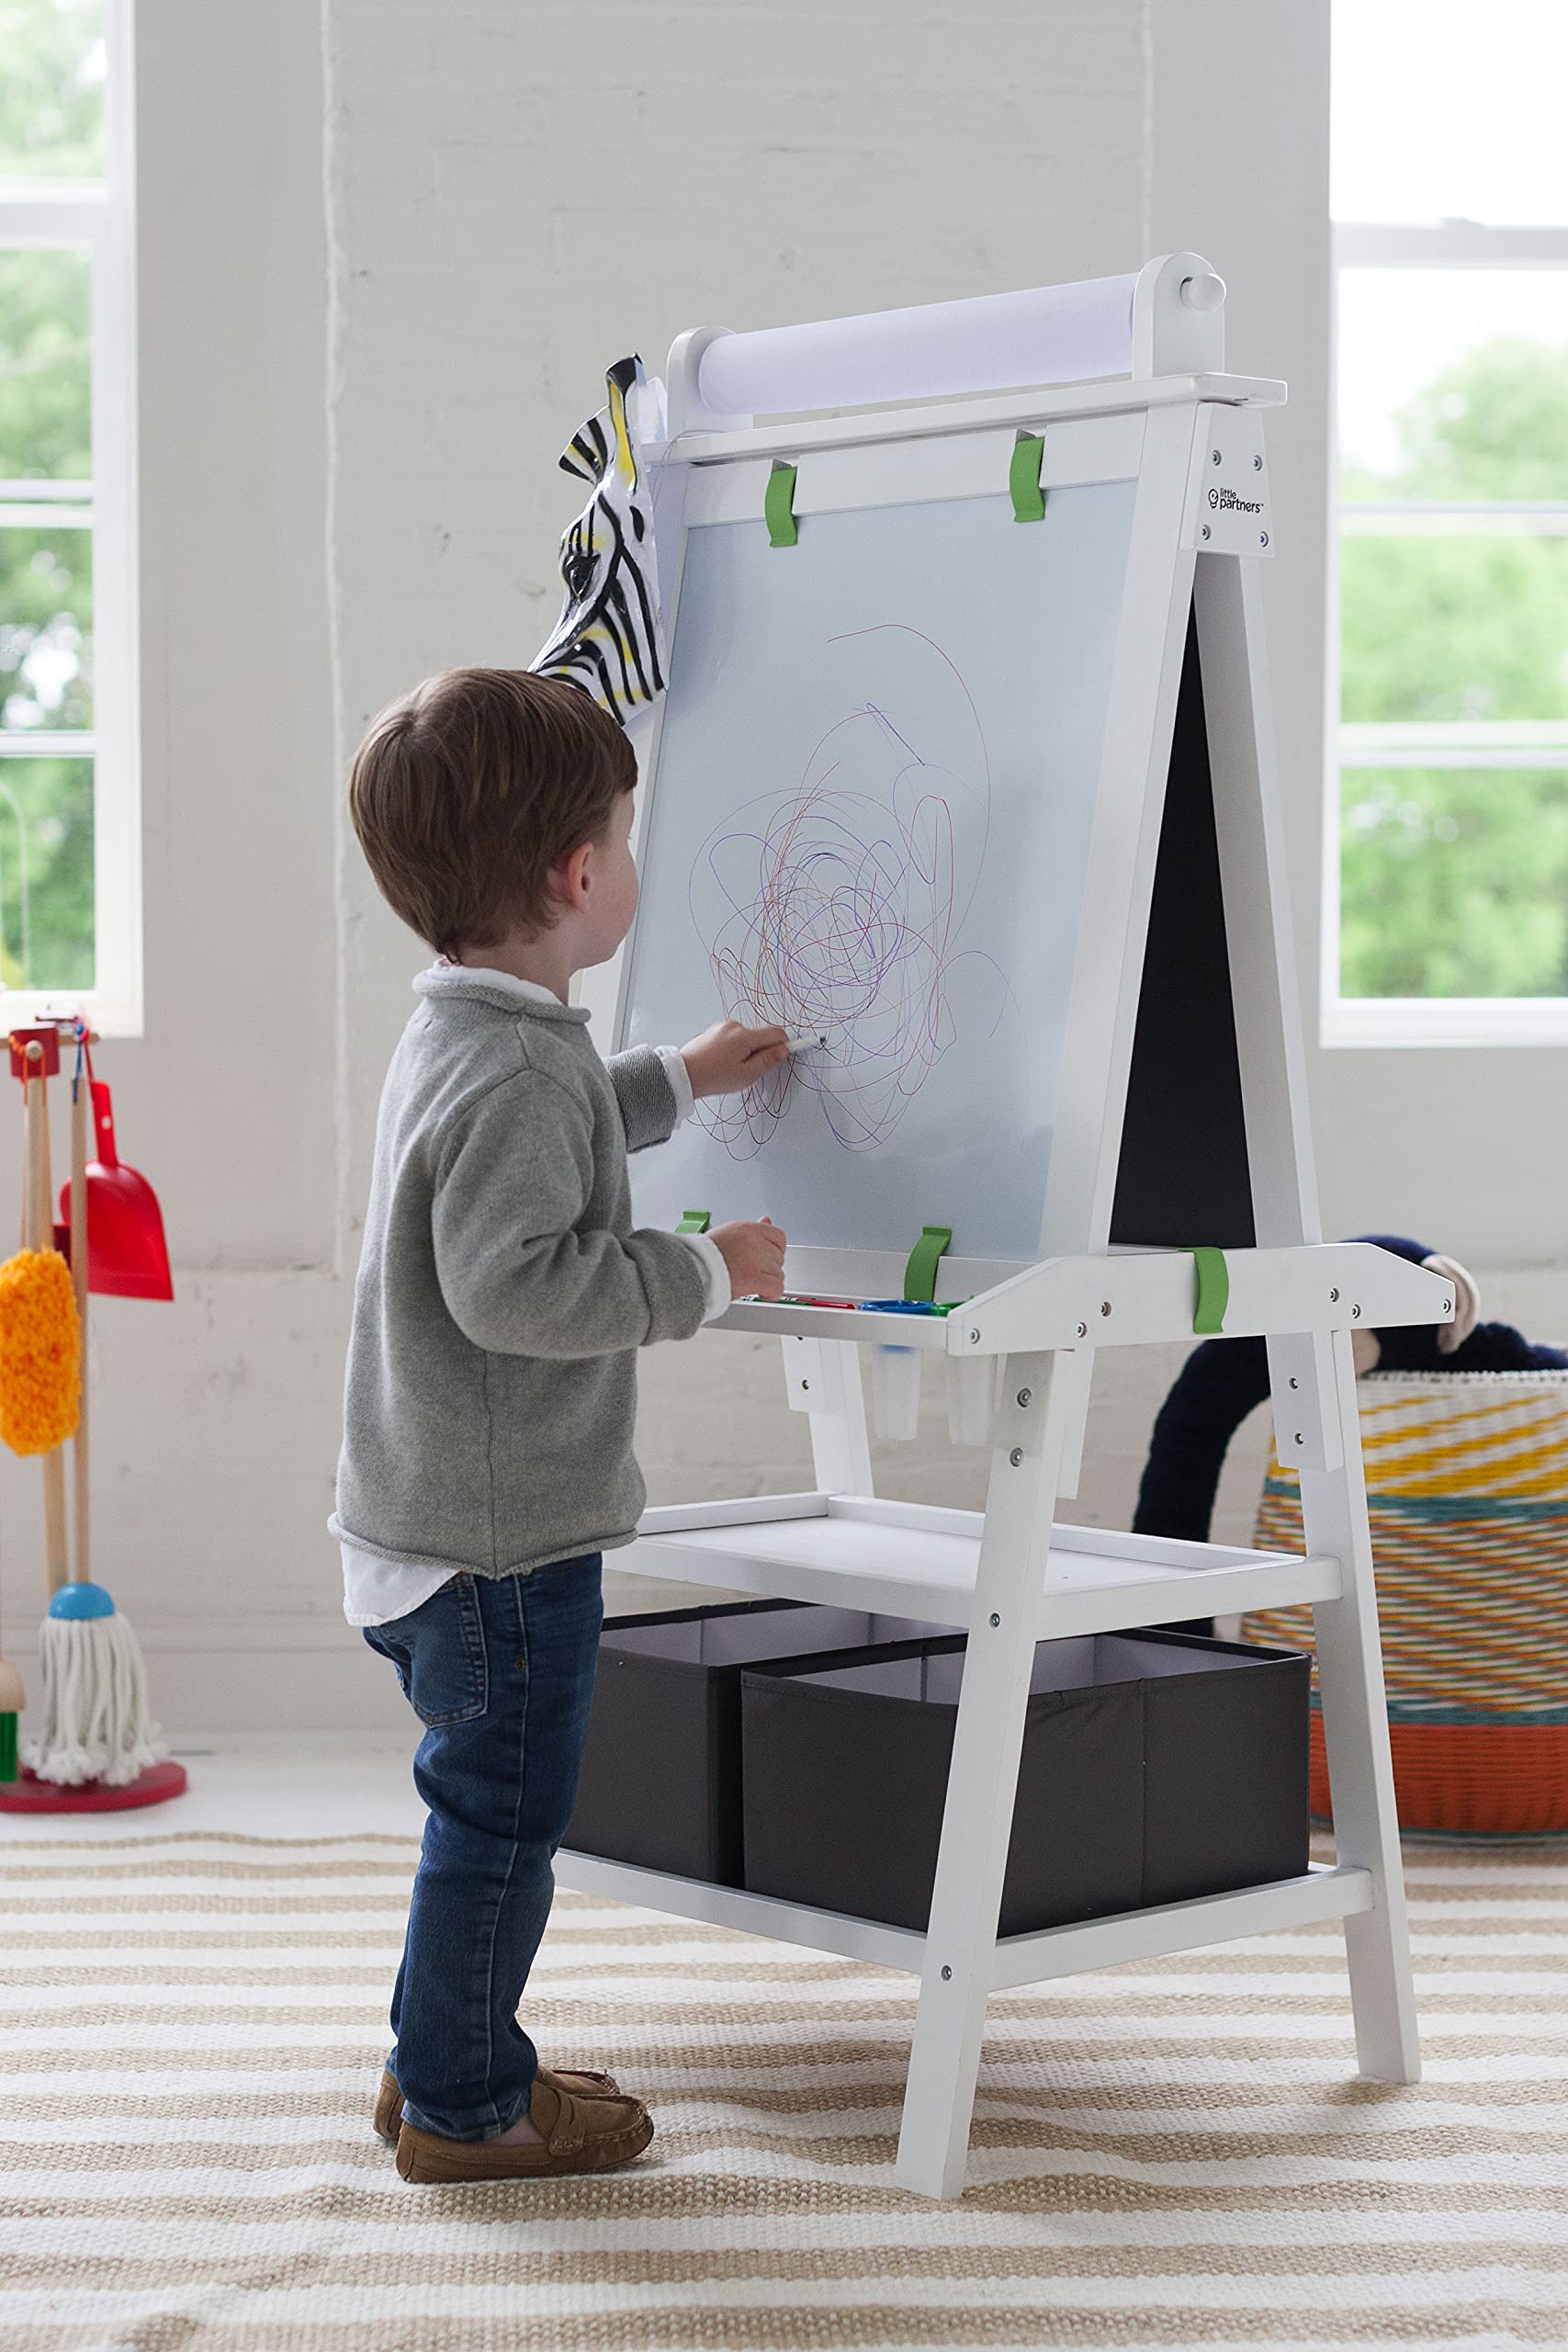 3-in-1 Art Easel by Little Partners 2-Sided A-Frame Art Easel with Chalk Board, Dry Erase, Storage, Paper Feed and Accessories for Toddlers (Soft White)